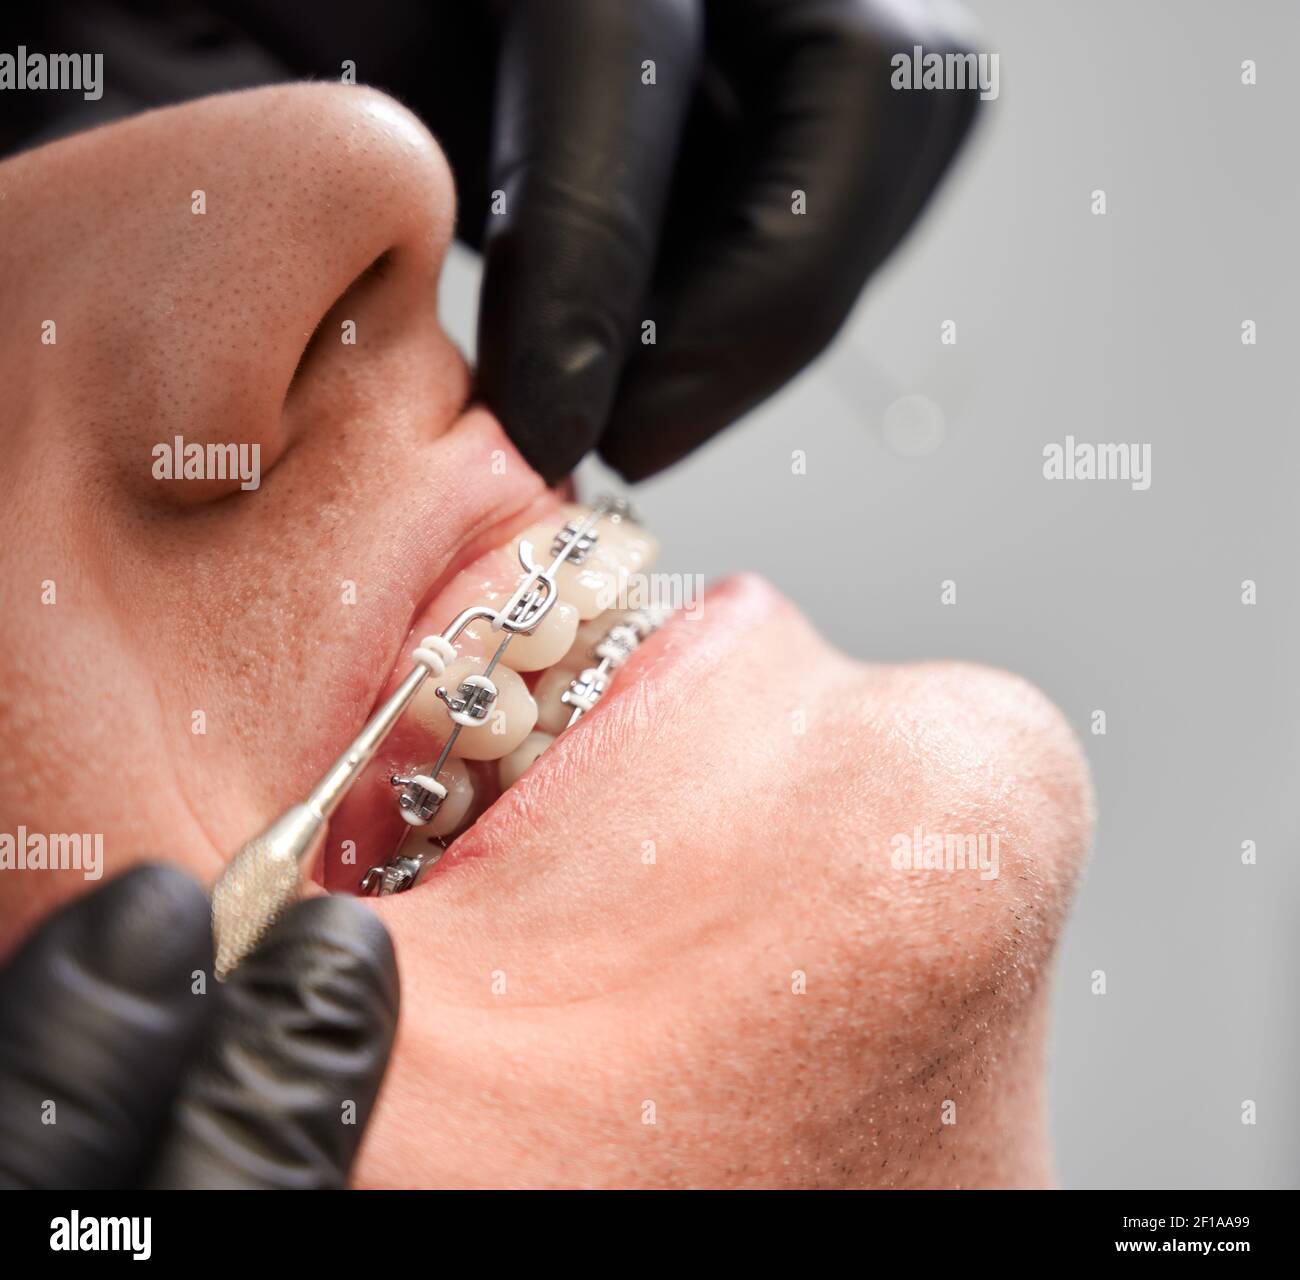 Close up of orthodontist hands putting elastic rubber band on patient brackets. Young man with wired metal braces on teeth receiving orthodontic treatment in dental clinic. Concept of dentistry. Stock Photo